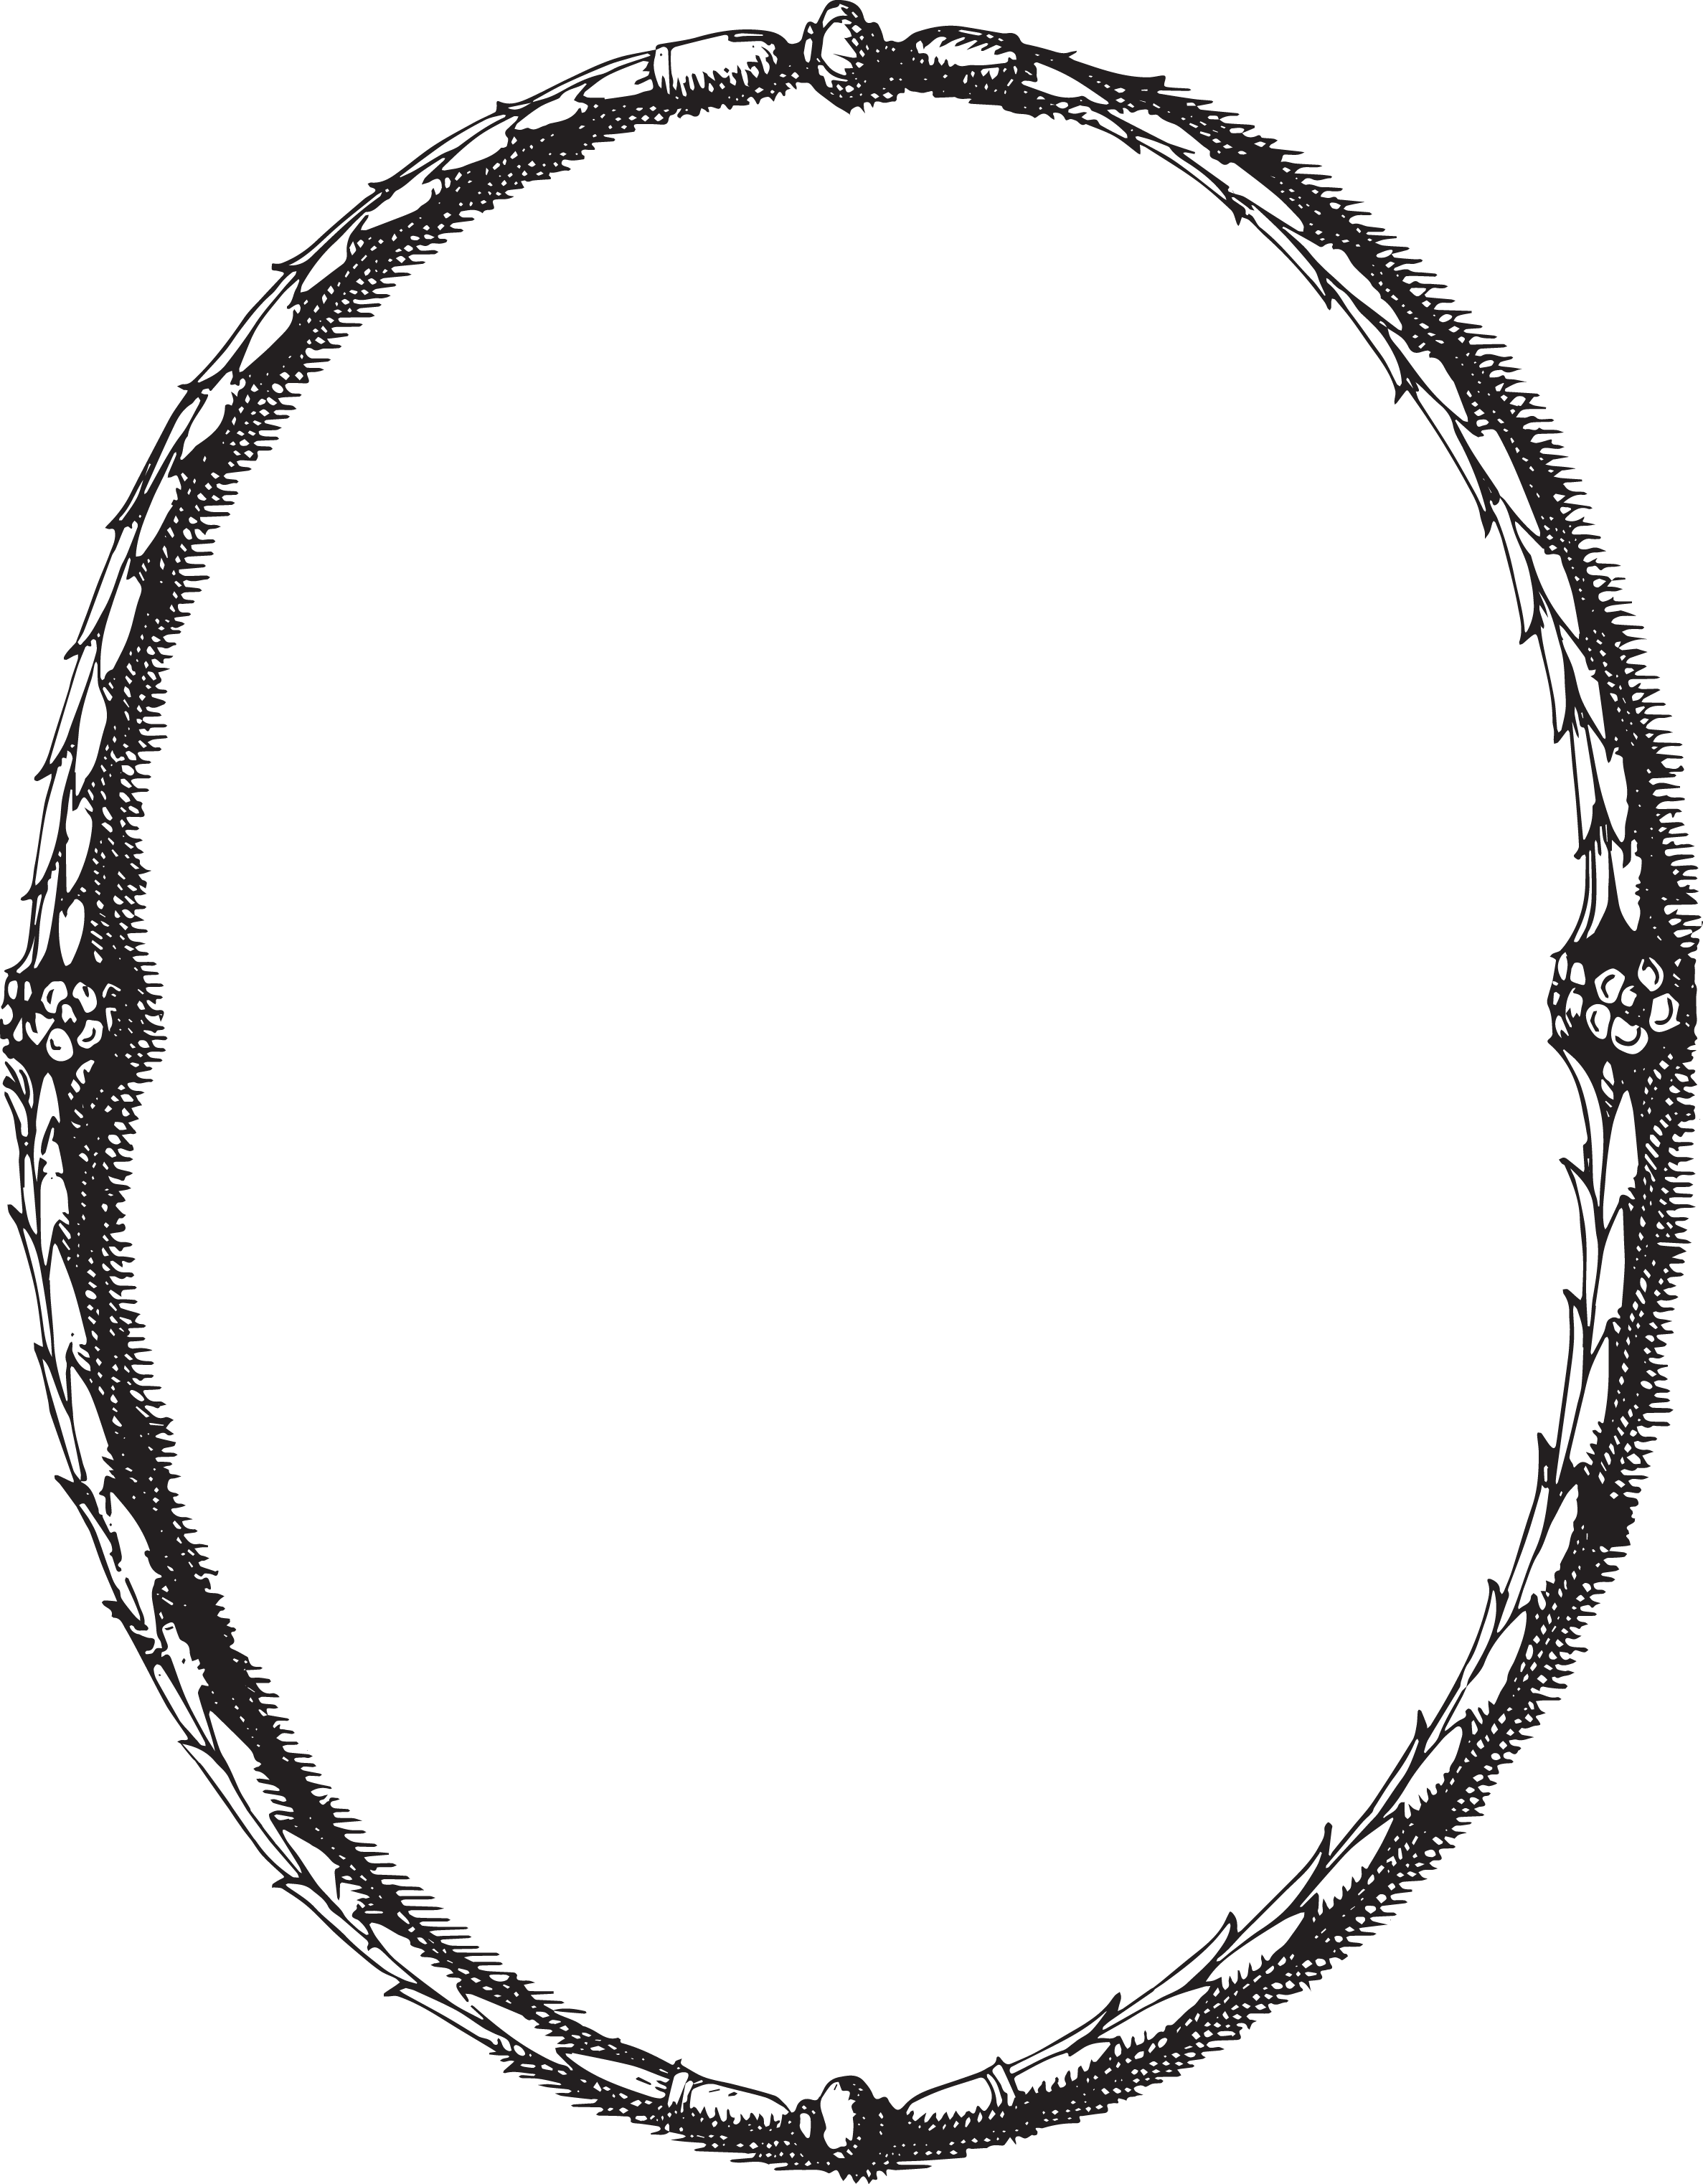 Free Oval Transparent, Download Free Oval Transparent png images, Free ...